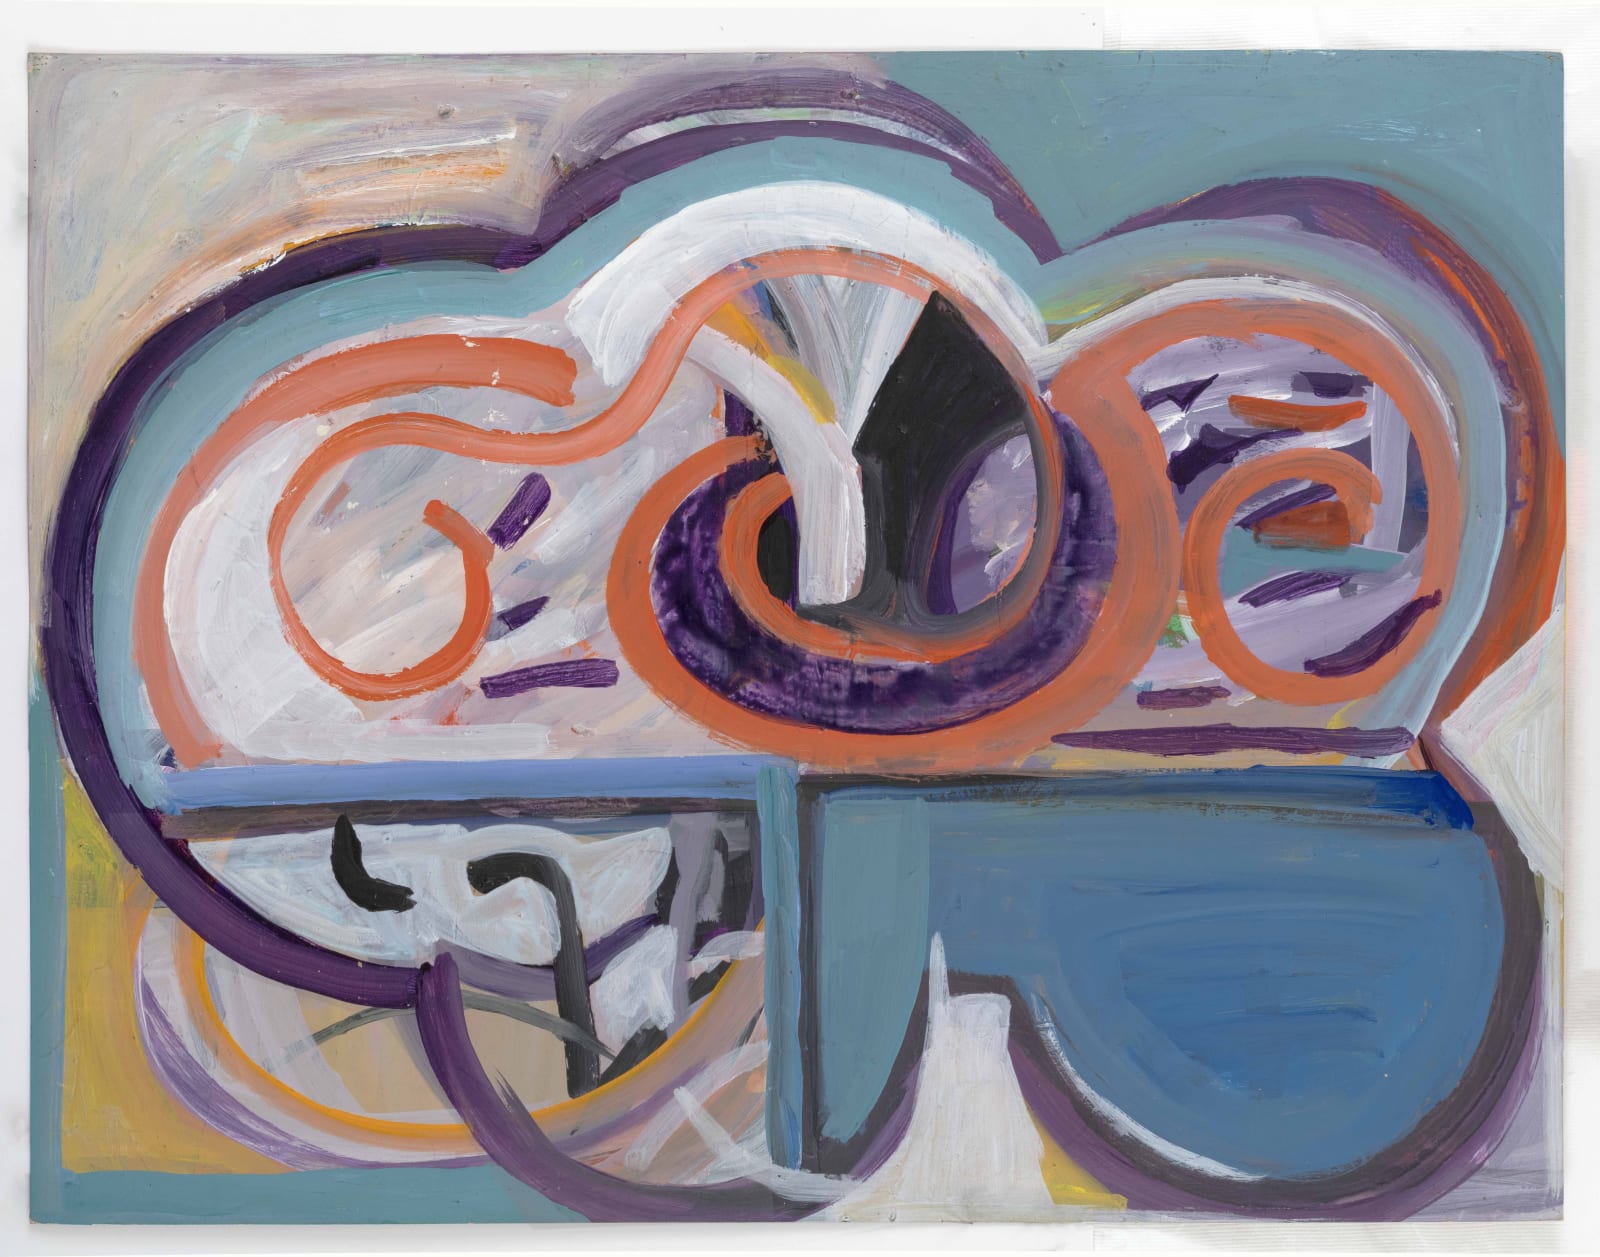 Shirley Jaffe Untitled, 1970 ca. Mixed media on paper 64 x 77,5 x 3,5 cm (25 3/16 x 30 1/2 x 1 3/8 in.) framed